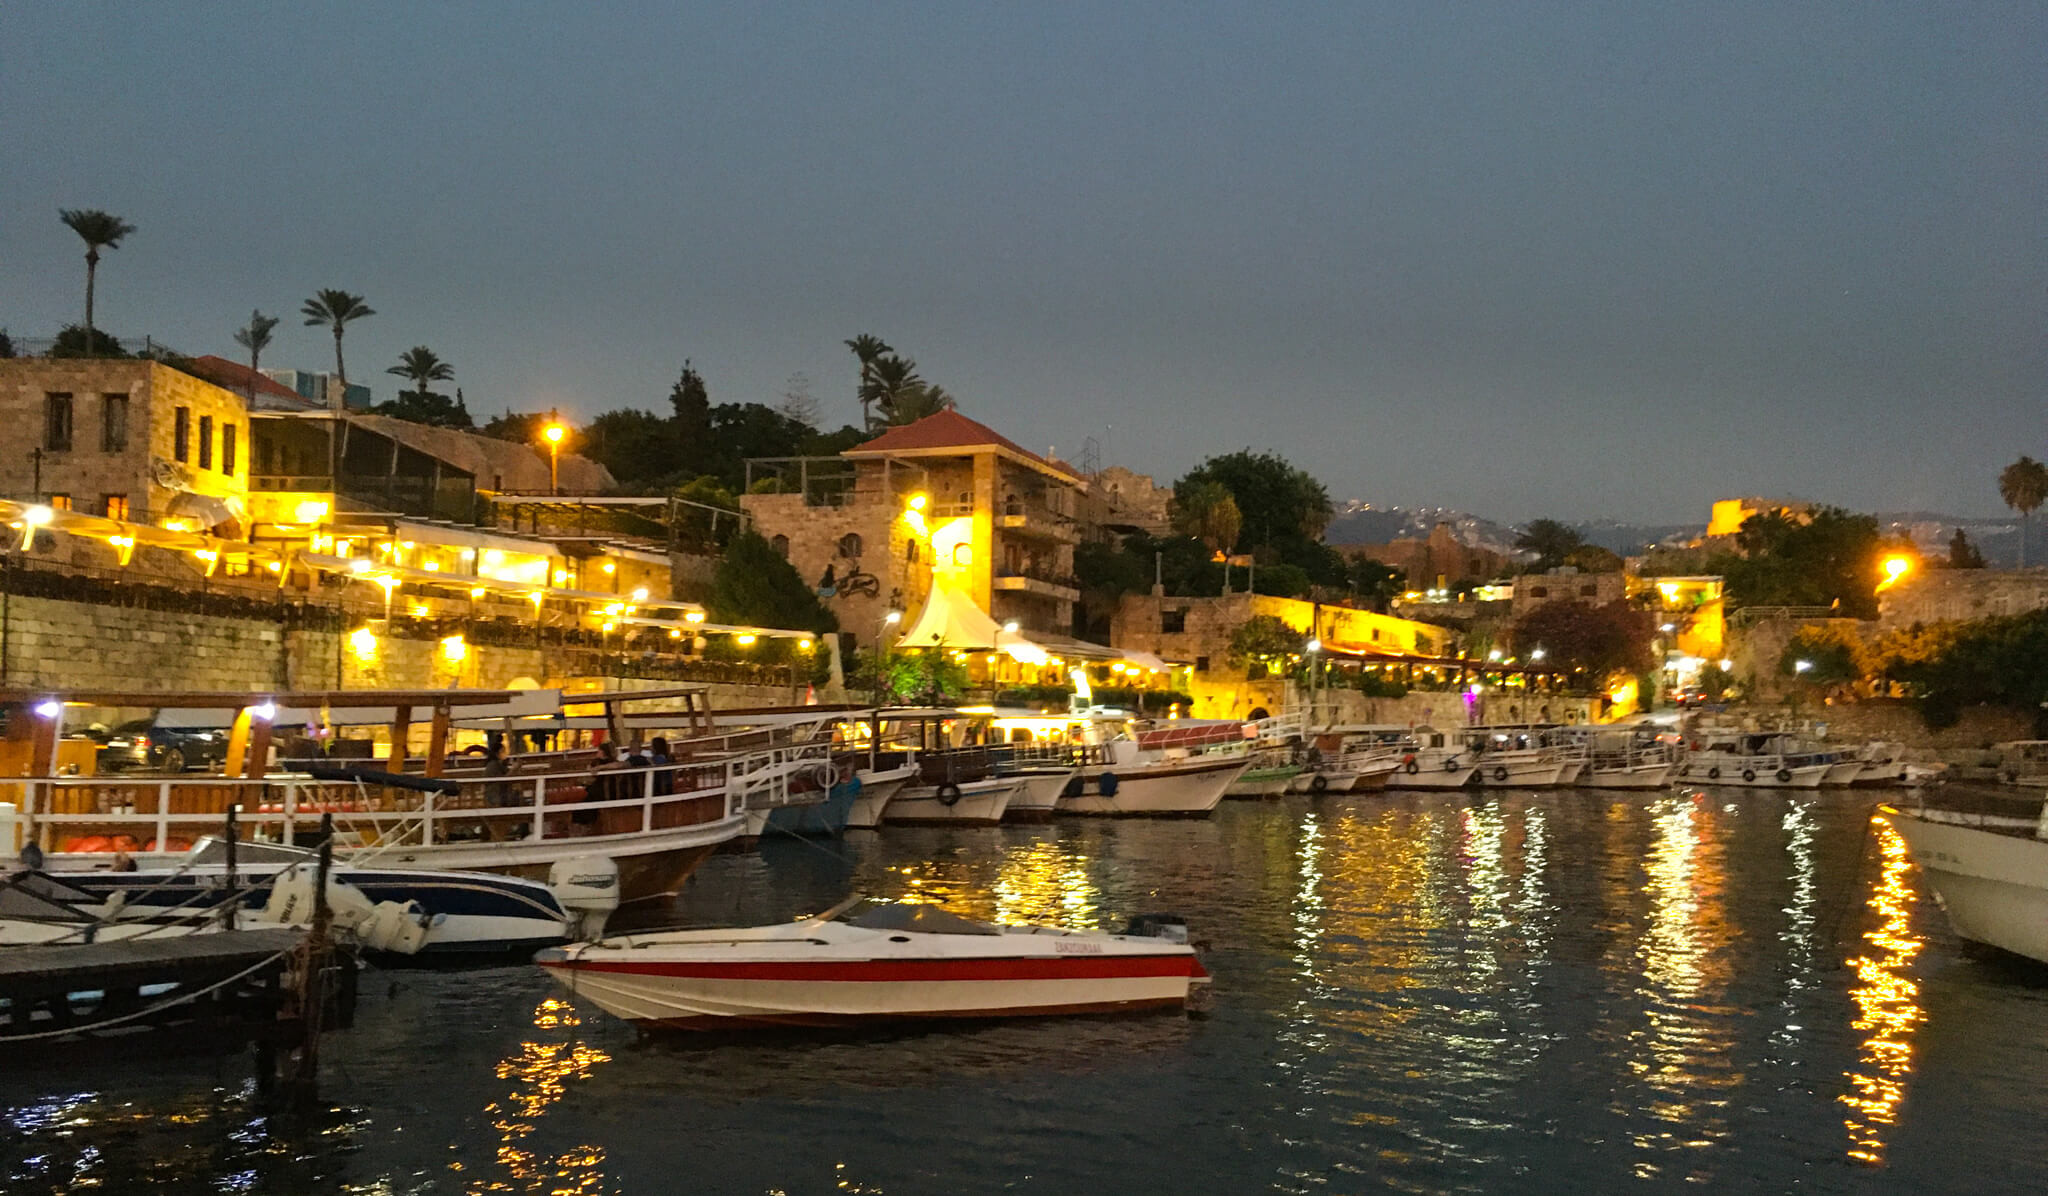 The waterfront of Byblos lit up at night